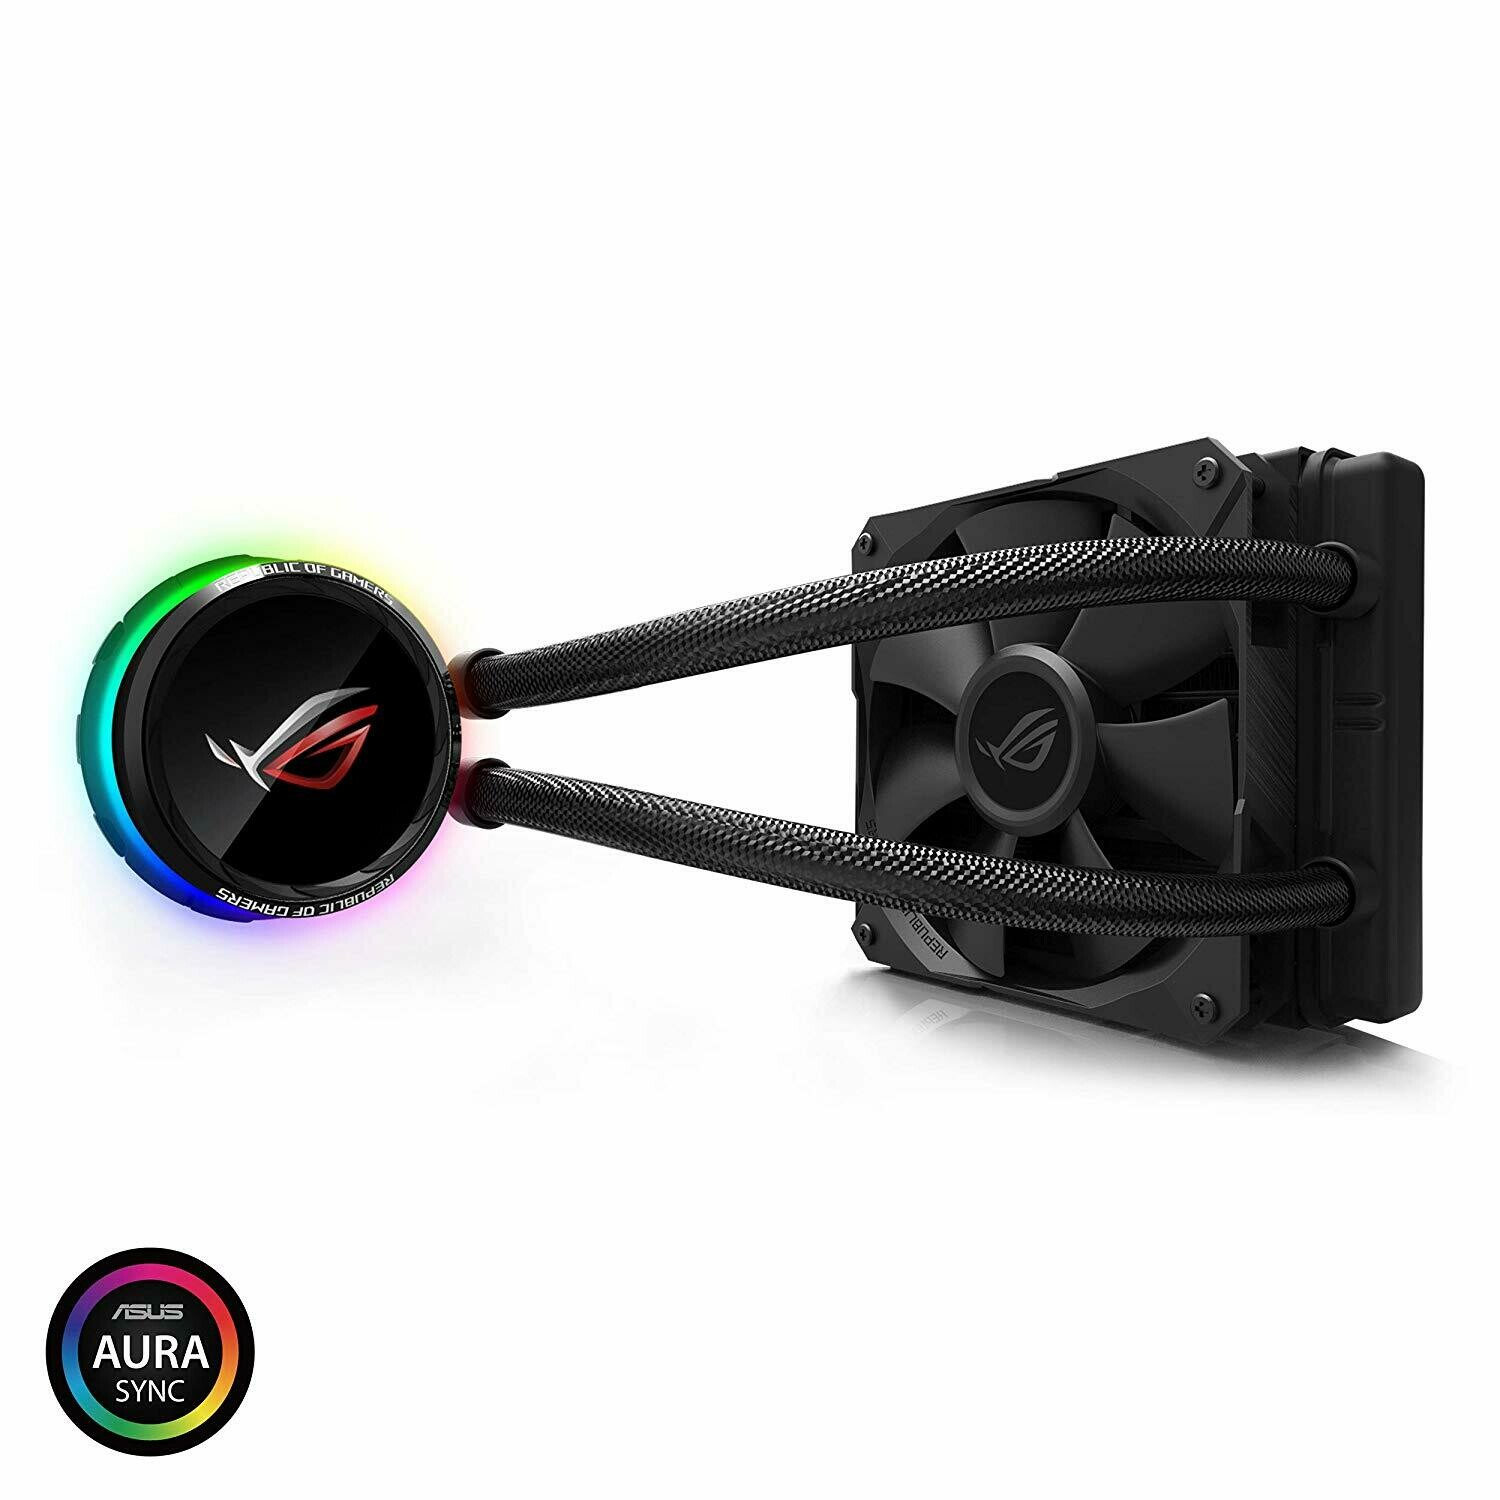 Asus ROG RYUO 120 RGB AIO Liquid CPU Cooler 120mm Radiator (120mm 4-Pin PWM Fan) with Livedash OLED Panel and Fanxpert CONTROLS